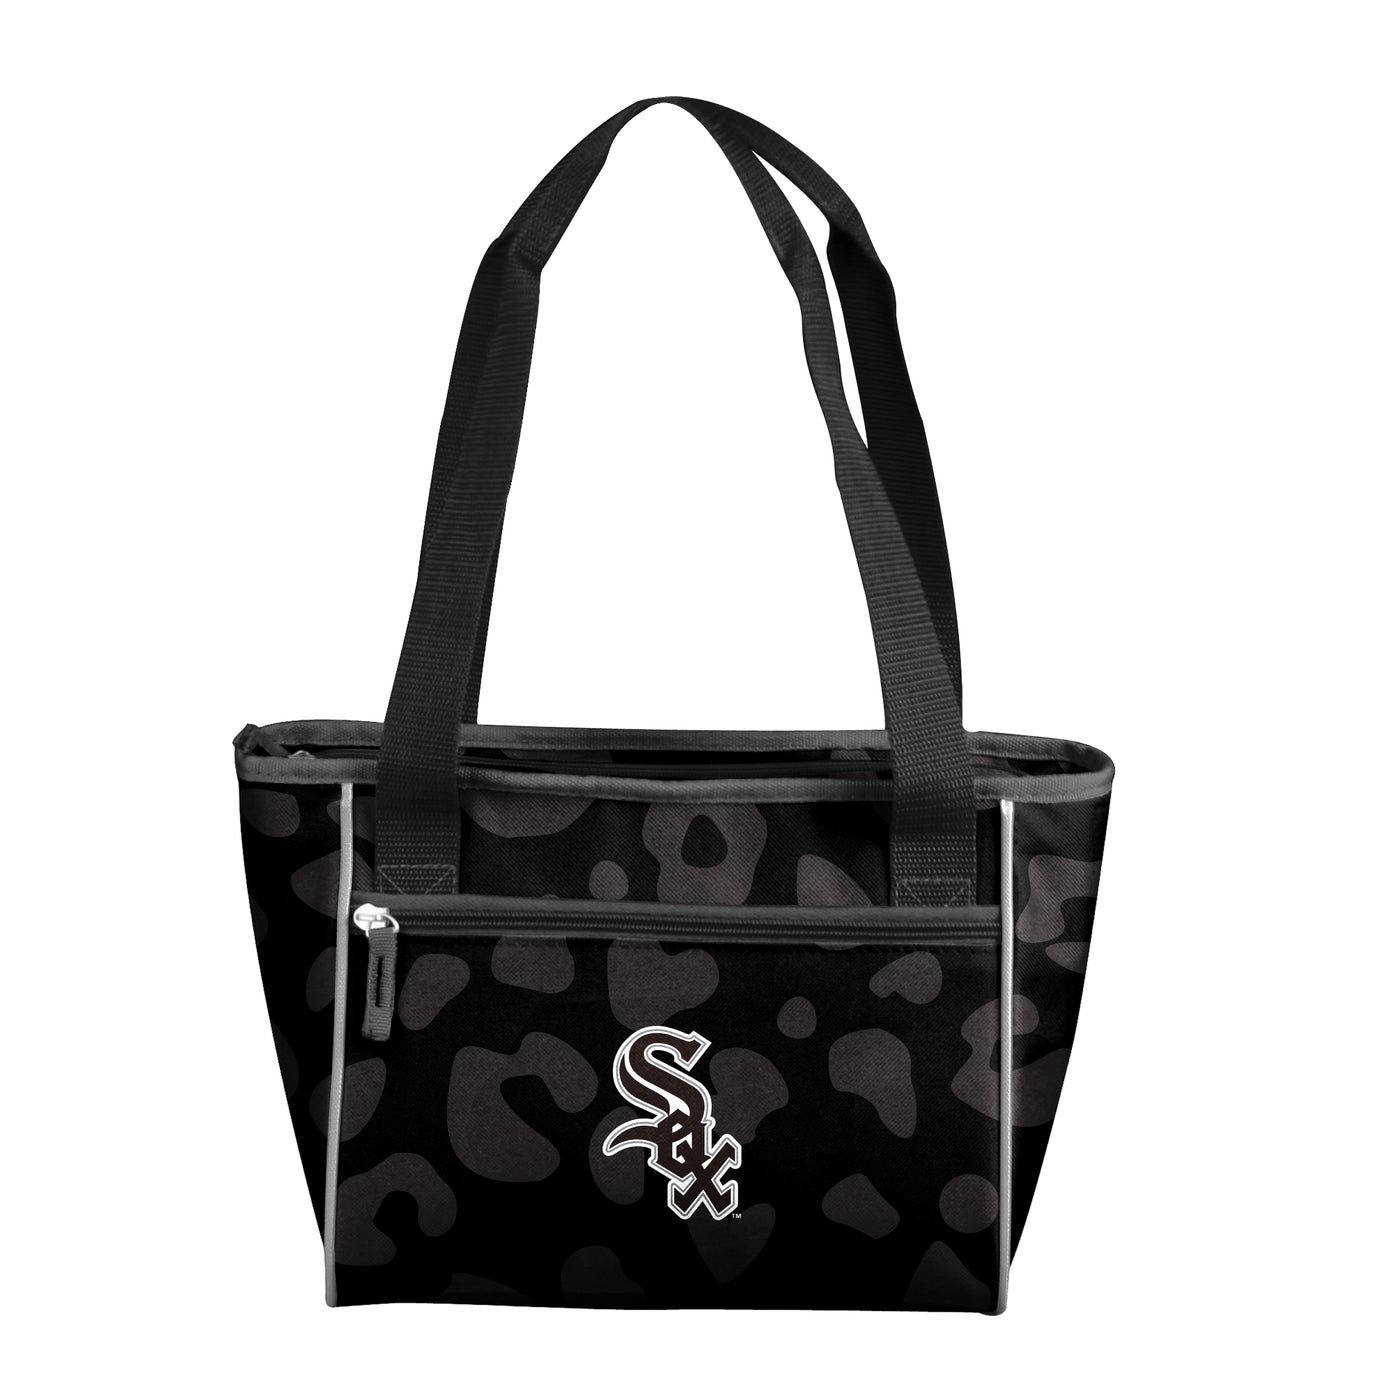 Chicago White Sox Coolers